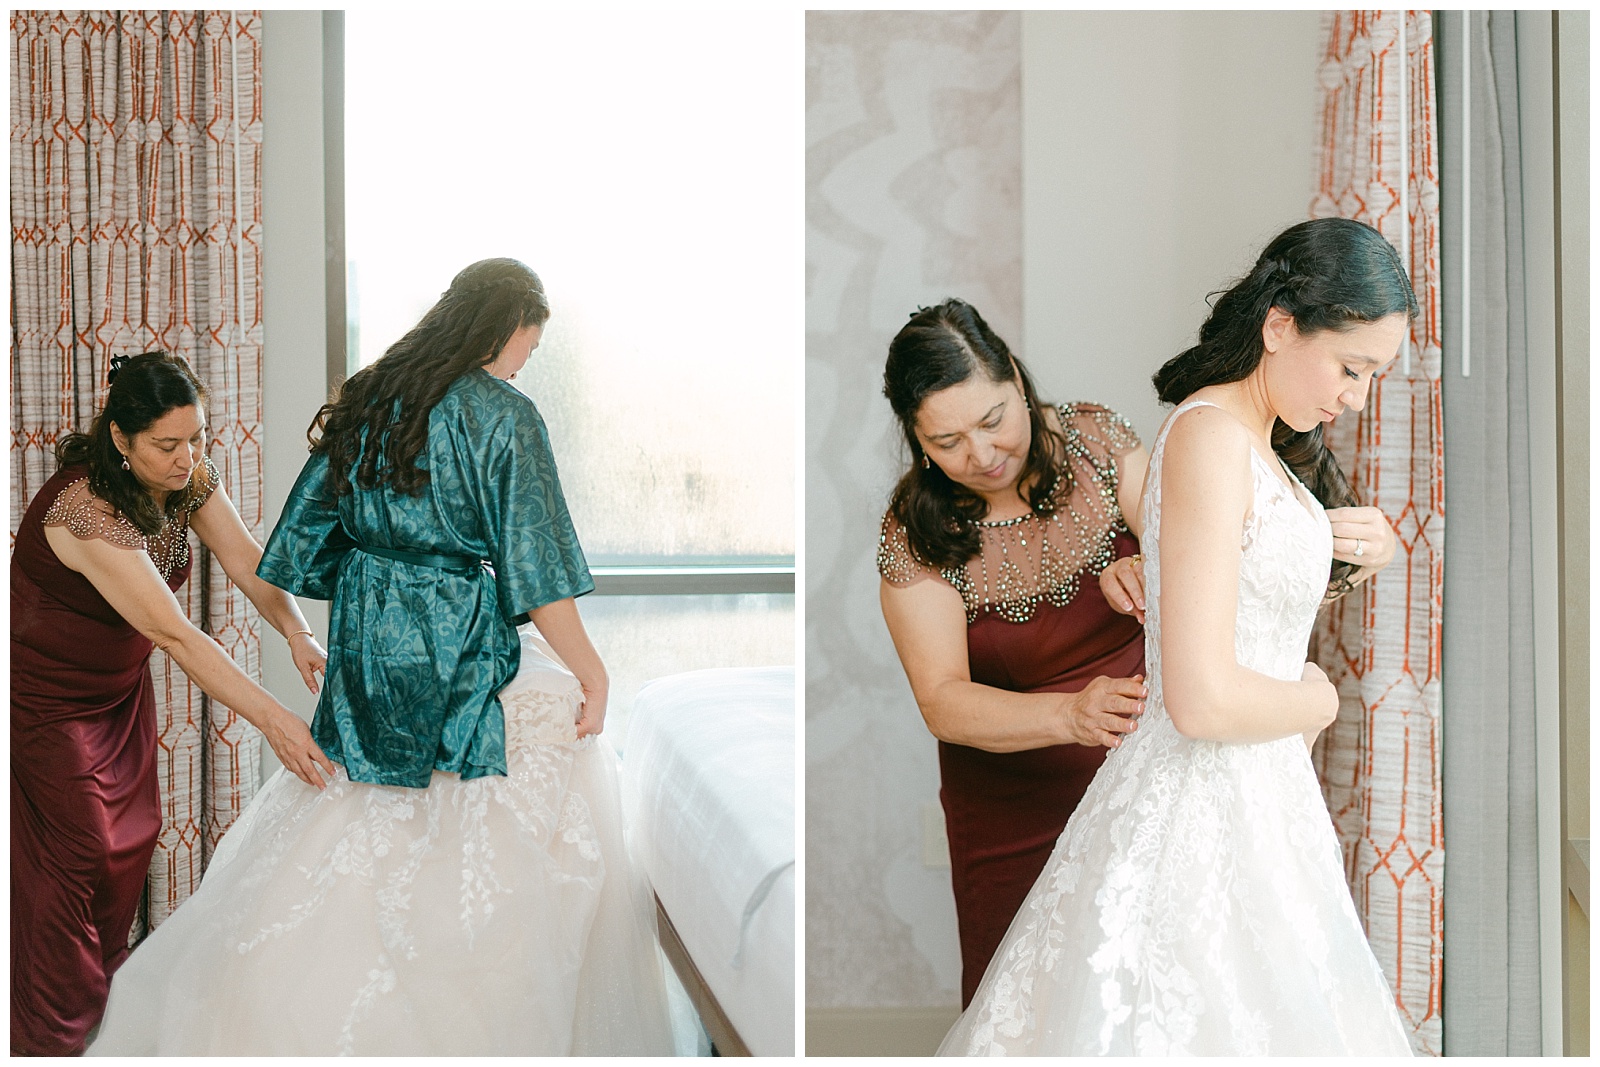 Left: Mother of the bride assisting the bride into her wedding dress during the getting ready phase of the wedding day.
Right: Mother of the bride zipping the bride into the wedding dress.
By Elizabeth Kane Photography at Disney's Riviera Resort in Orlando Florida